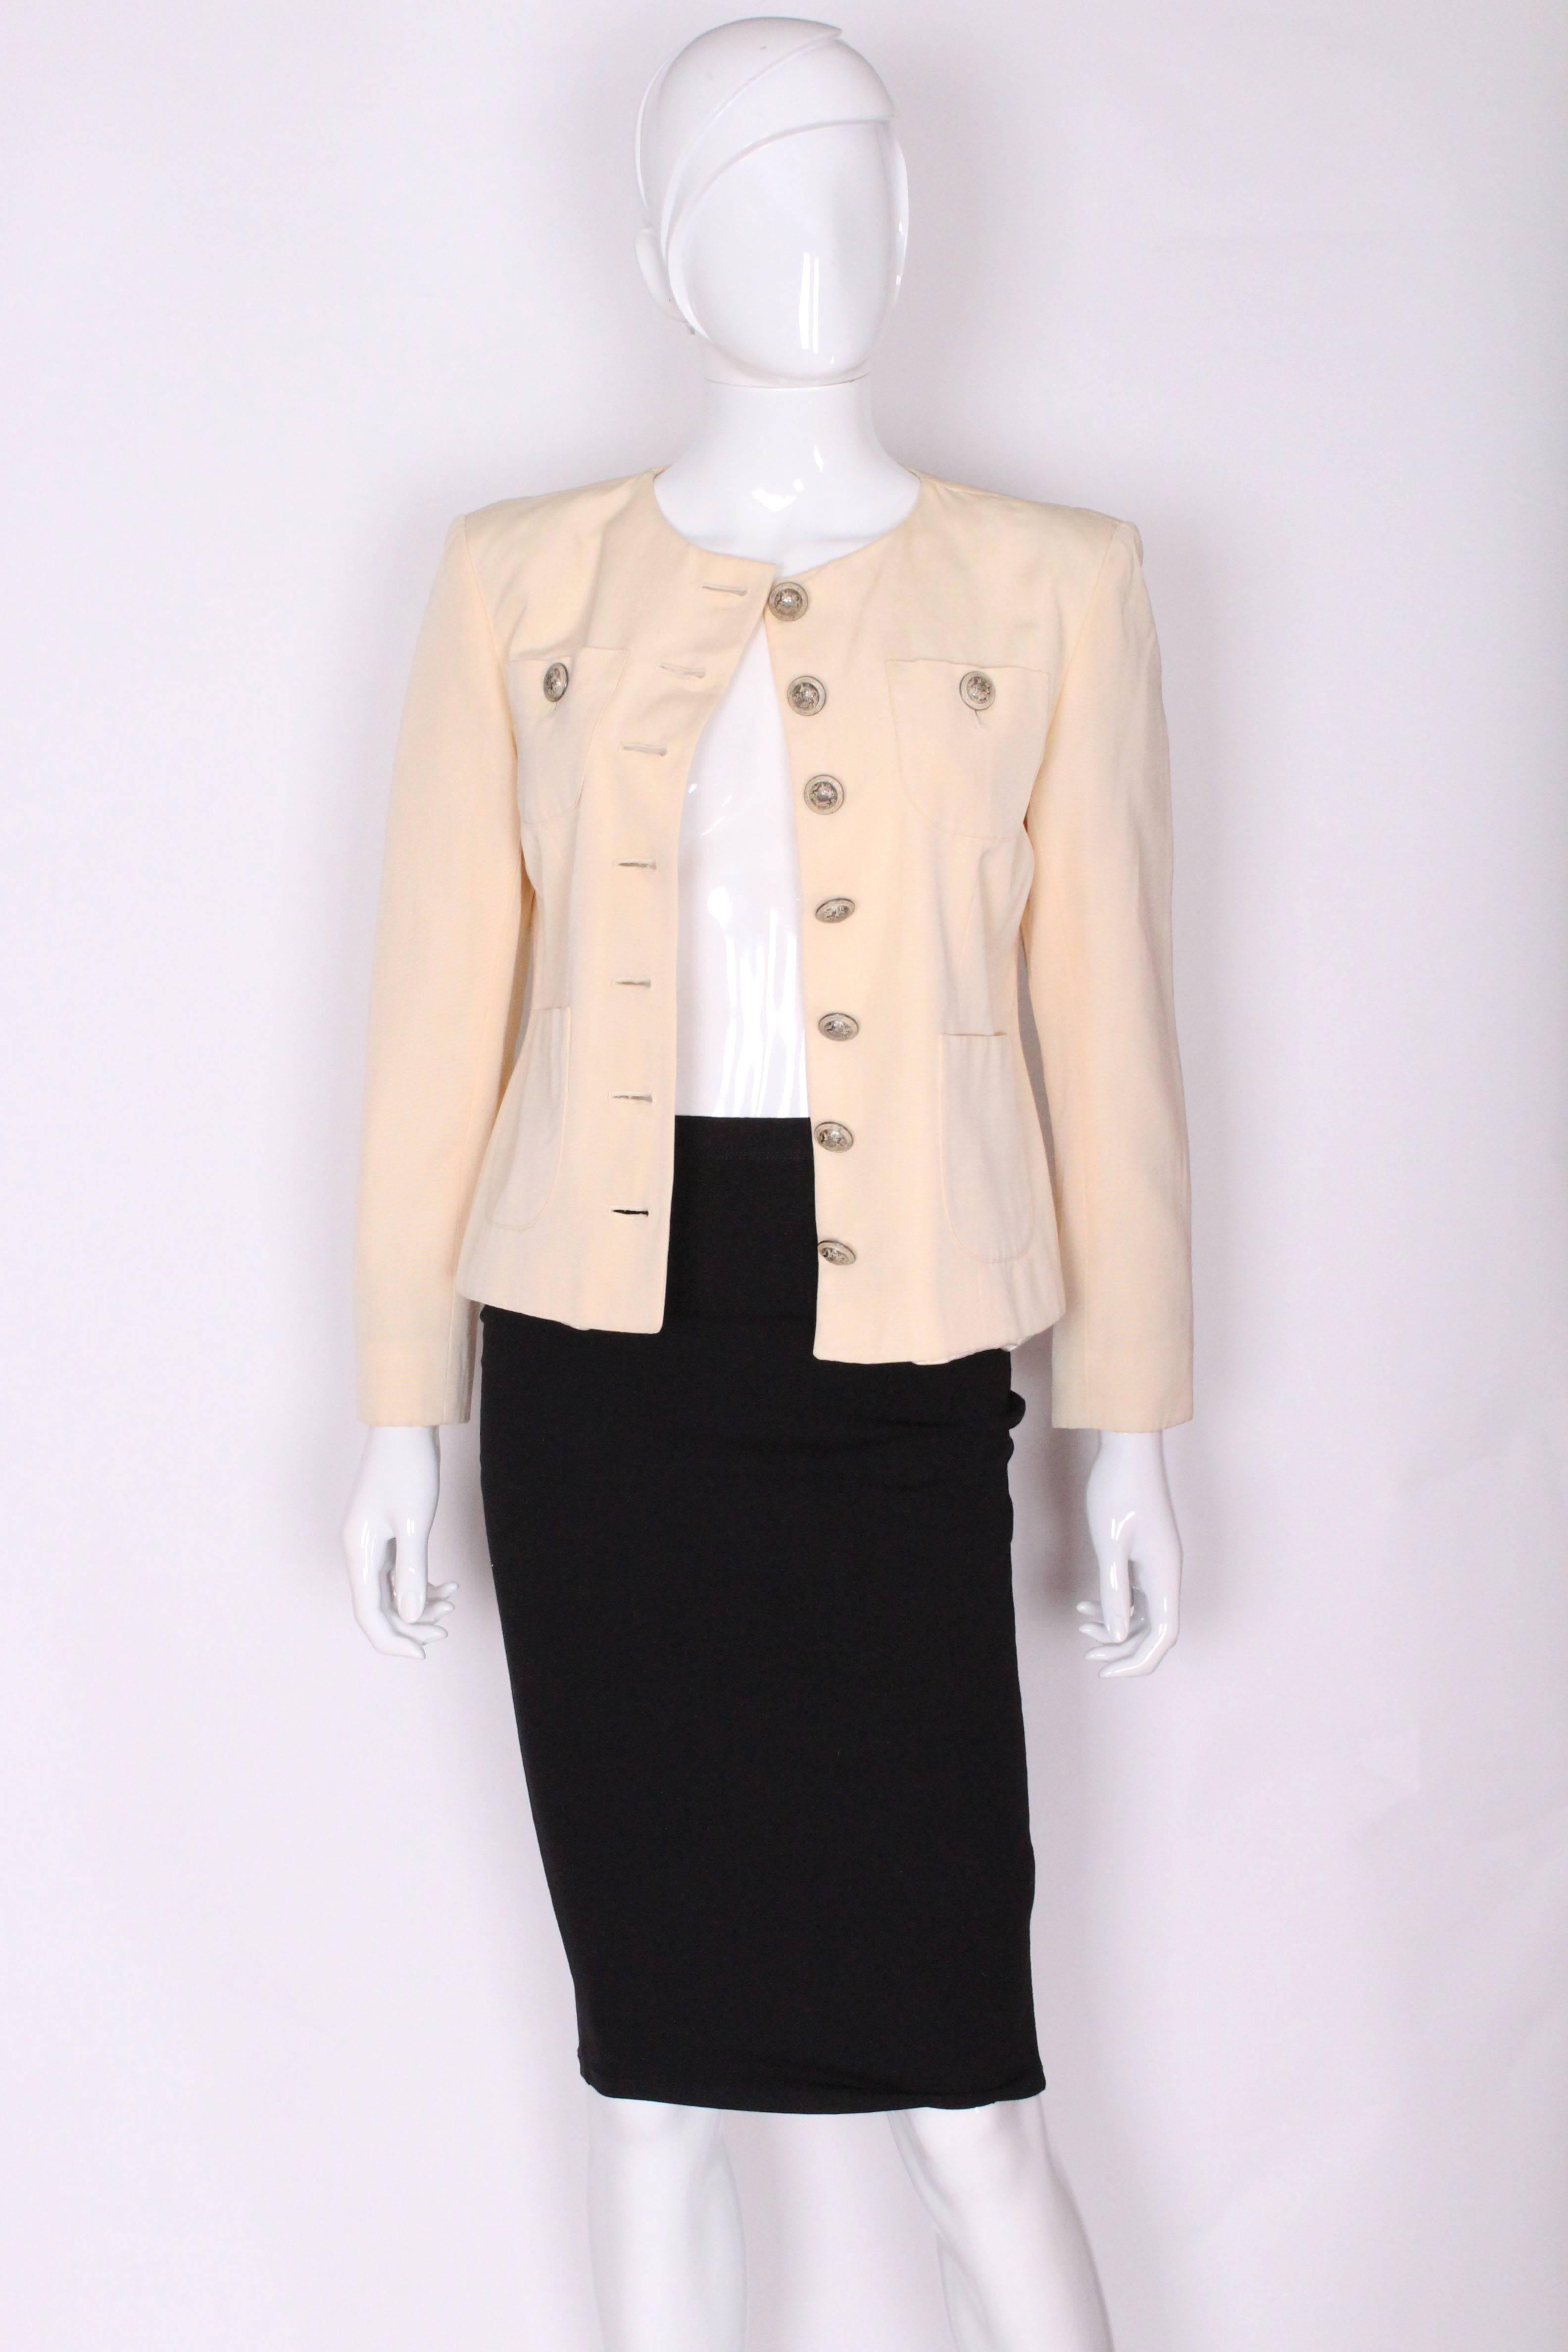 A chic cream jacket by Yves Saint Laurent , Encore line.
This jacket is made of a clotted cream colour fabric with a fine rib detail. It is collarless, with 4 pockets on the front. It has a central 7 button opening with a button on each breast